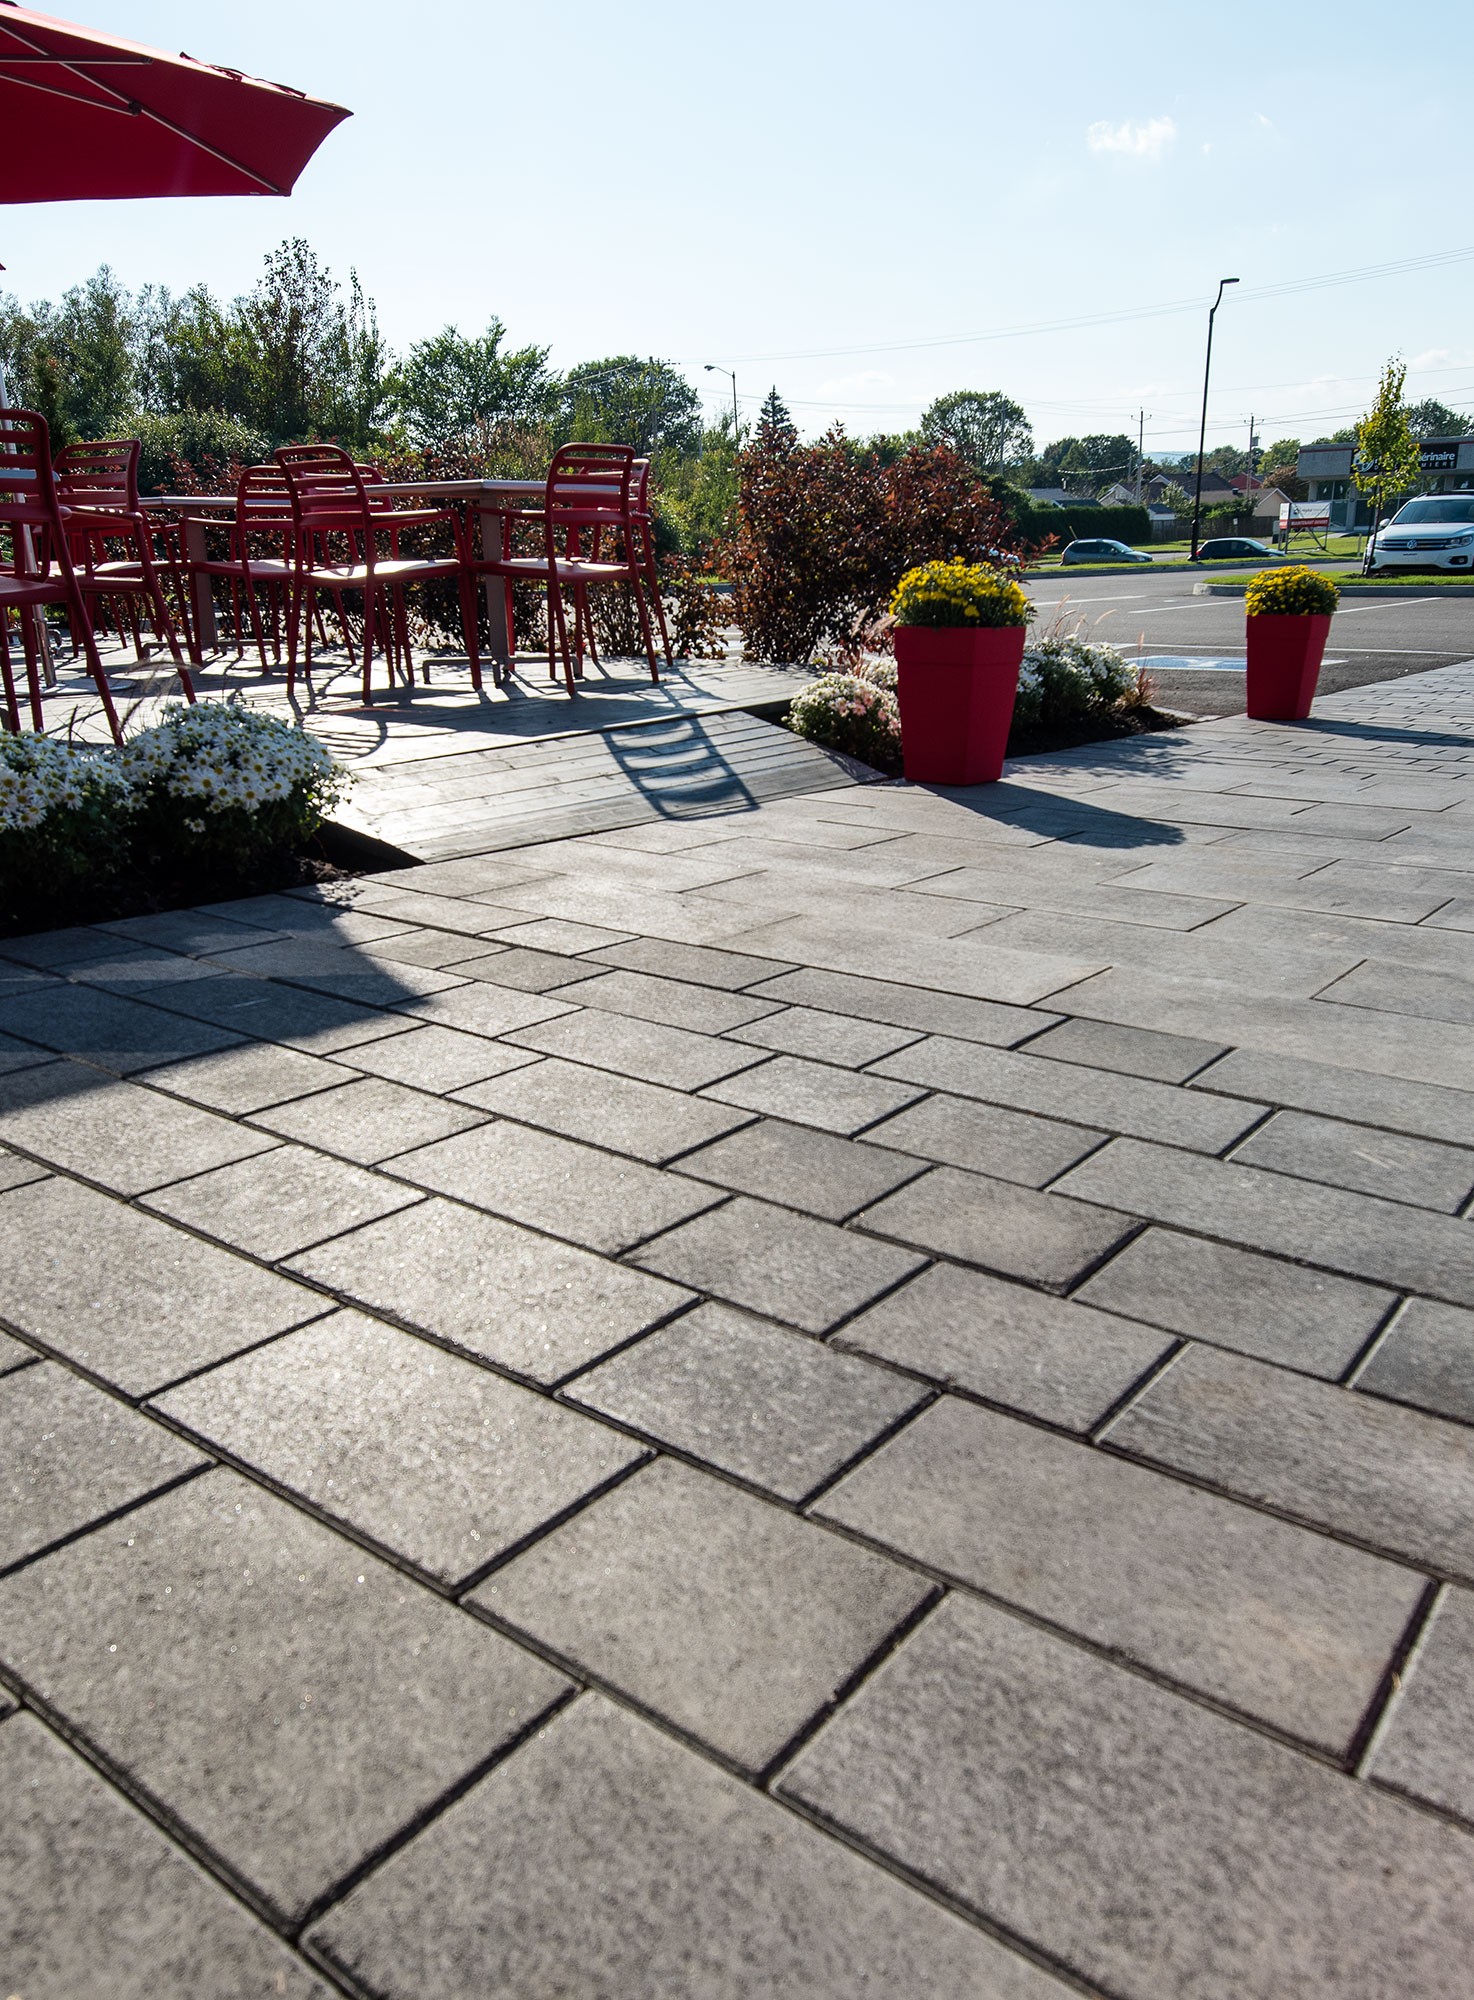 Rectangular Artline pavers with a mottled Umbriano finish create a path that leads to a parking lot, past a seating area and landscaping.